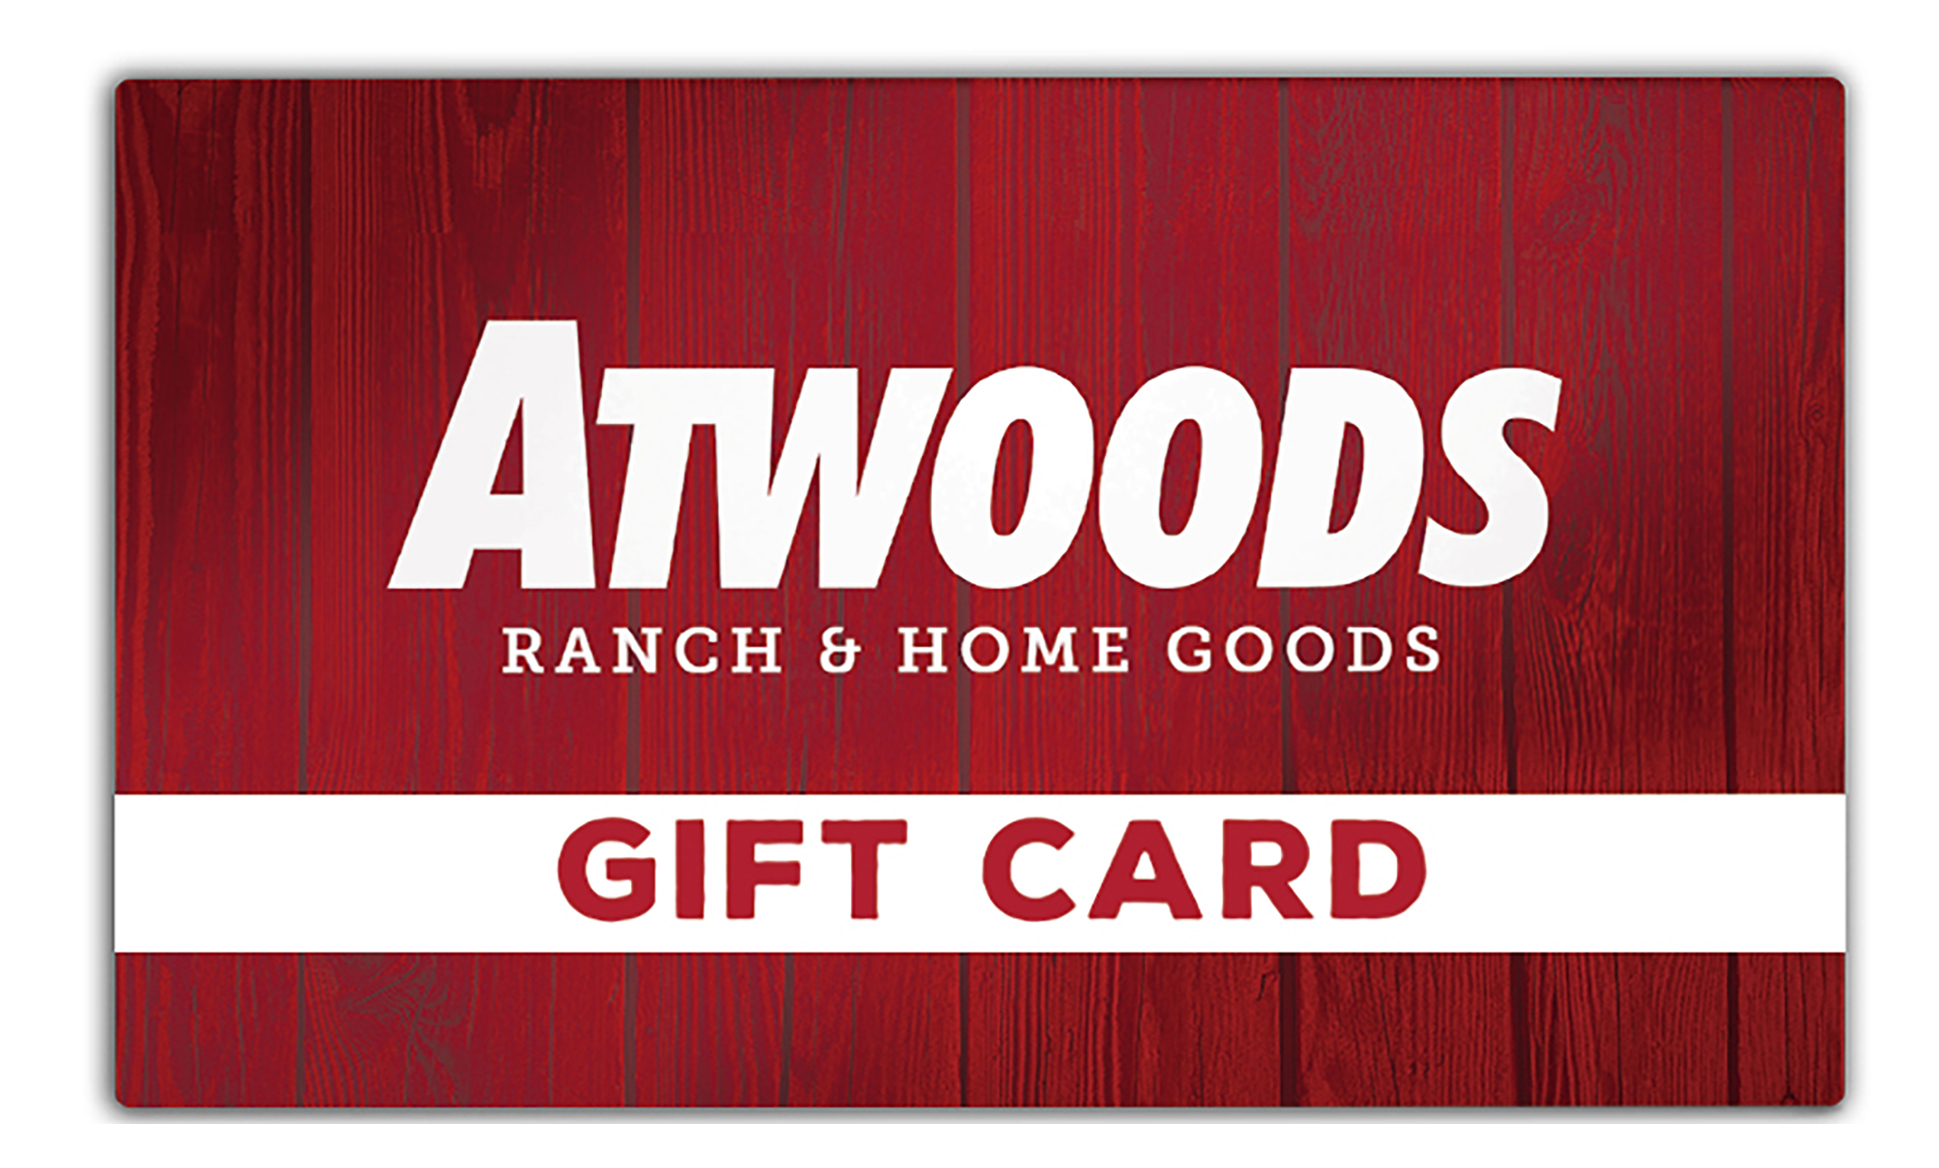 Atwoods Gift Card Landing Page.jpg